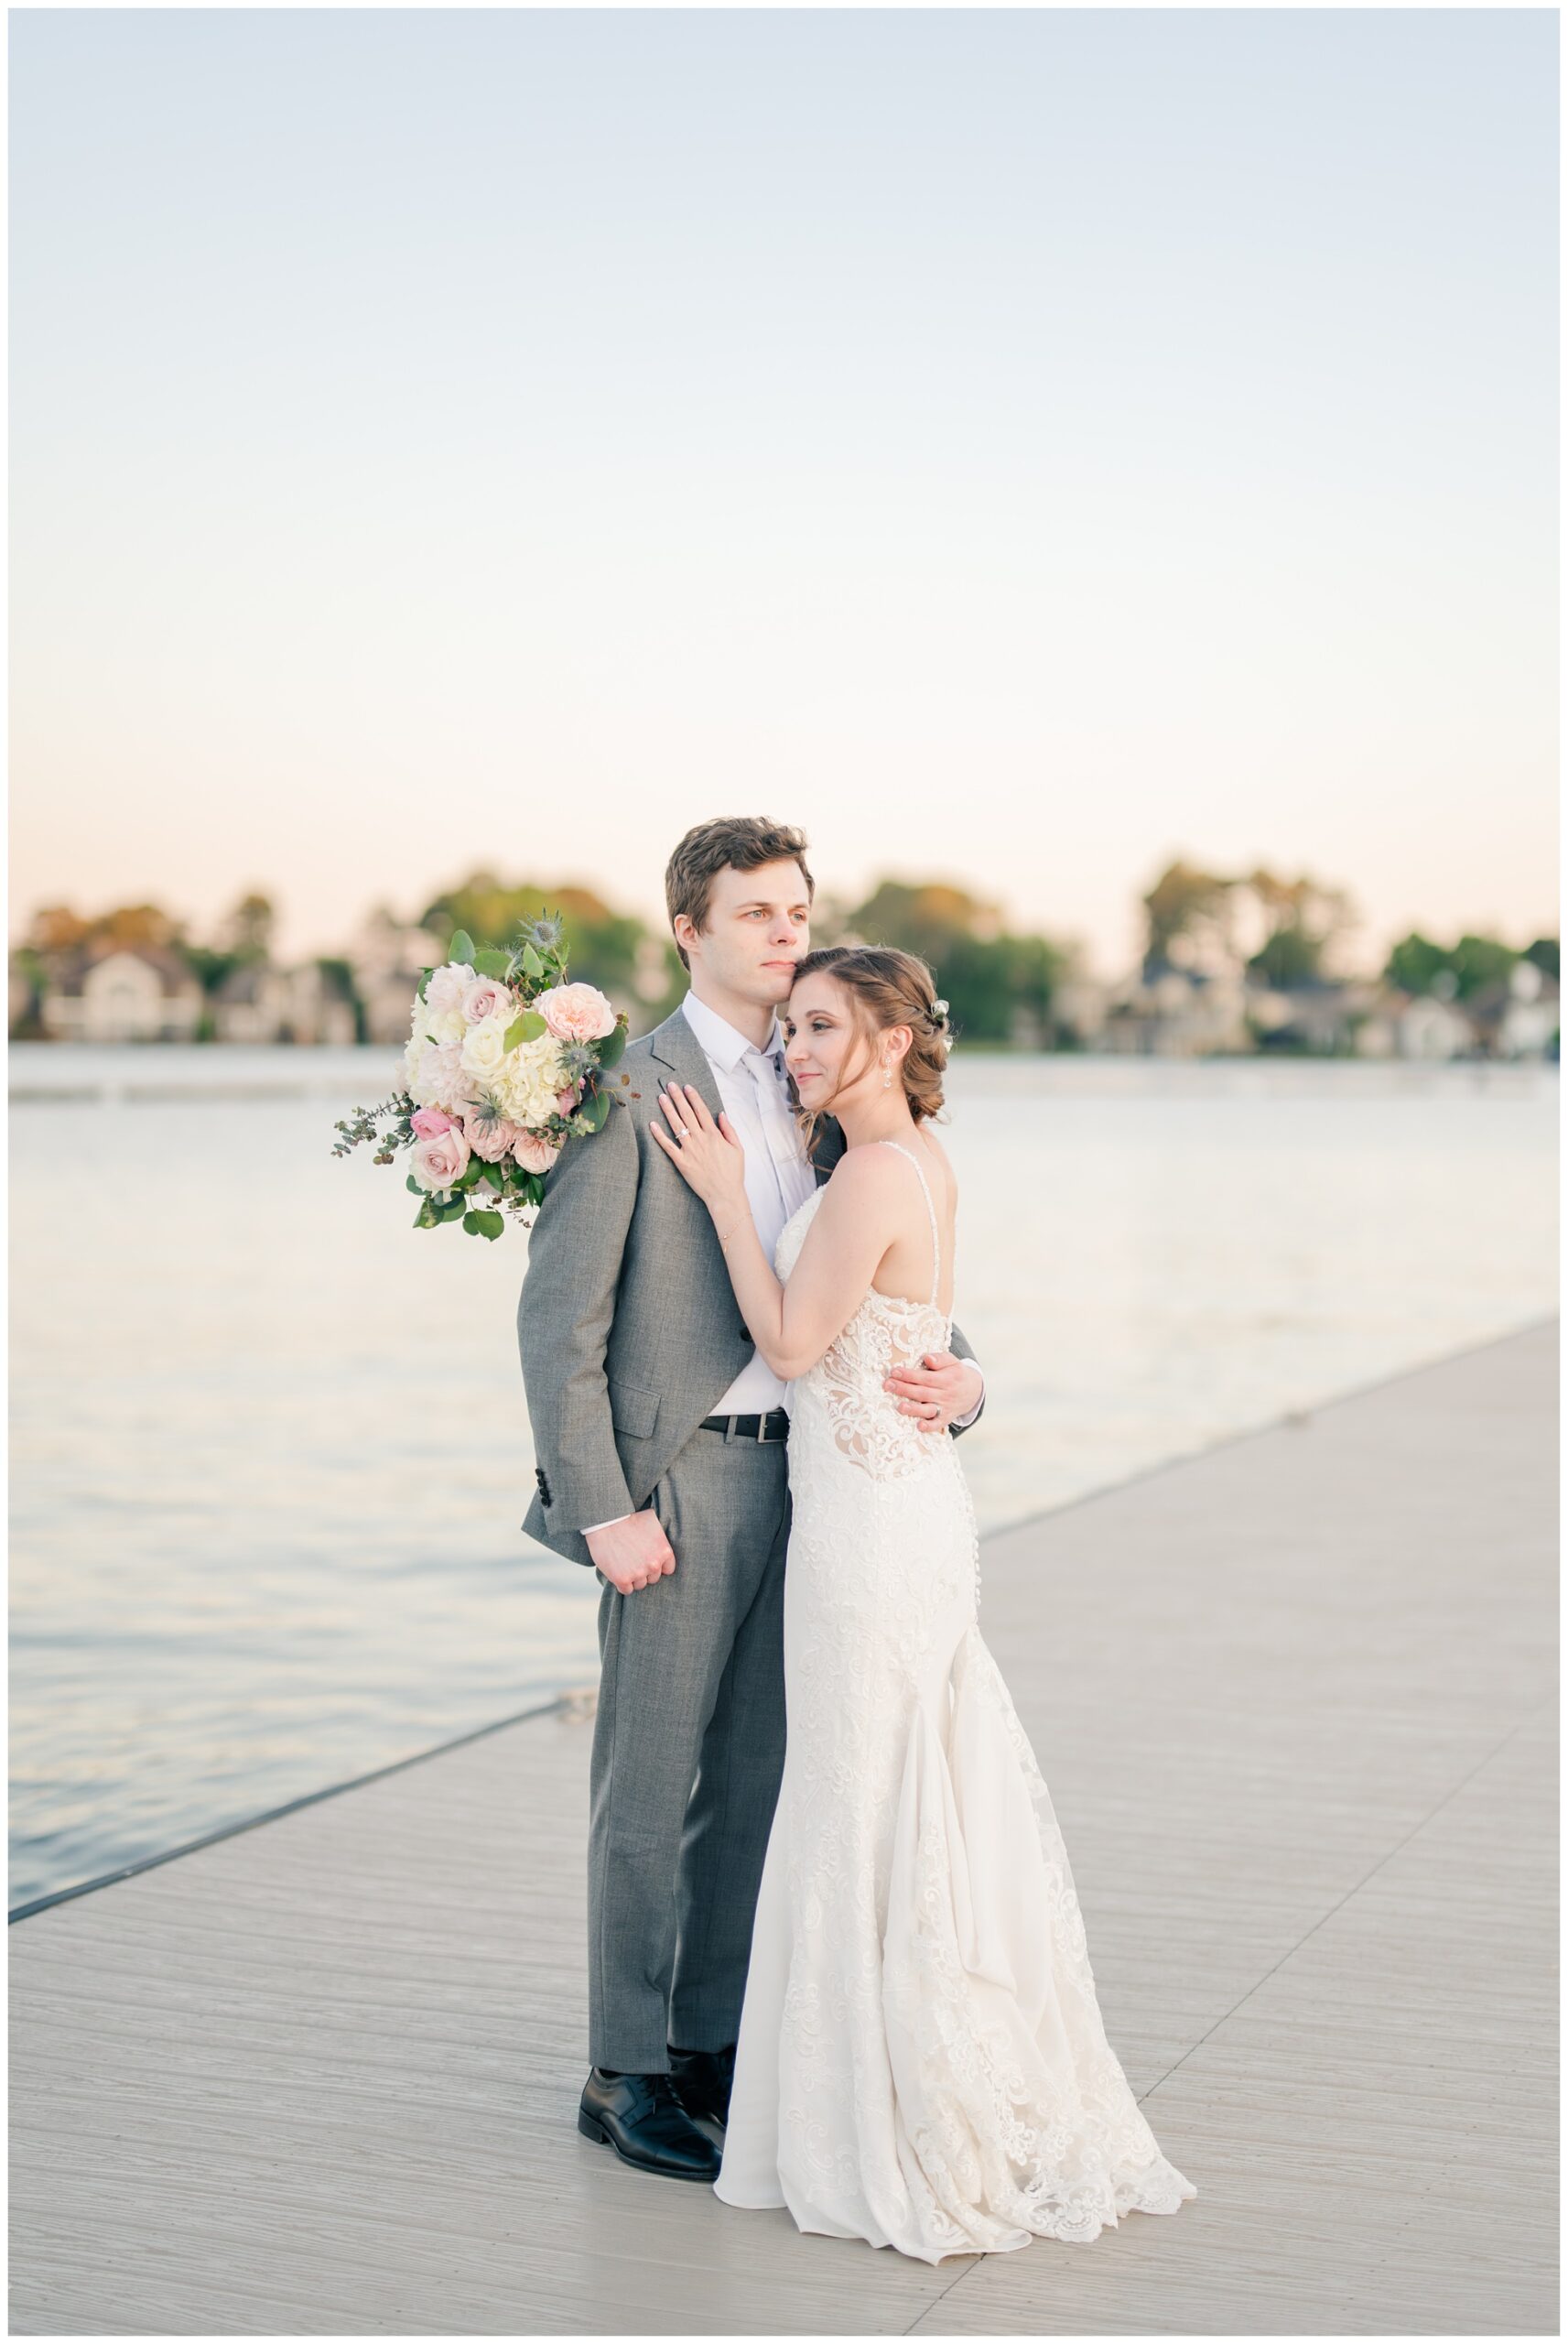 Bentwater Yacht Club Wedding Portrait on the dock, waterfront Lake Conroe.